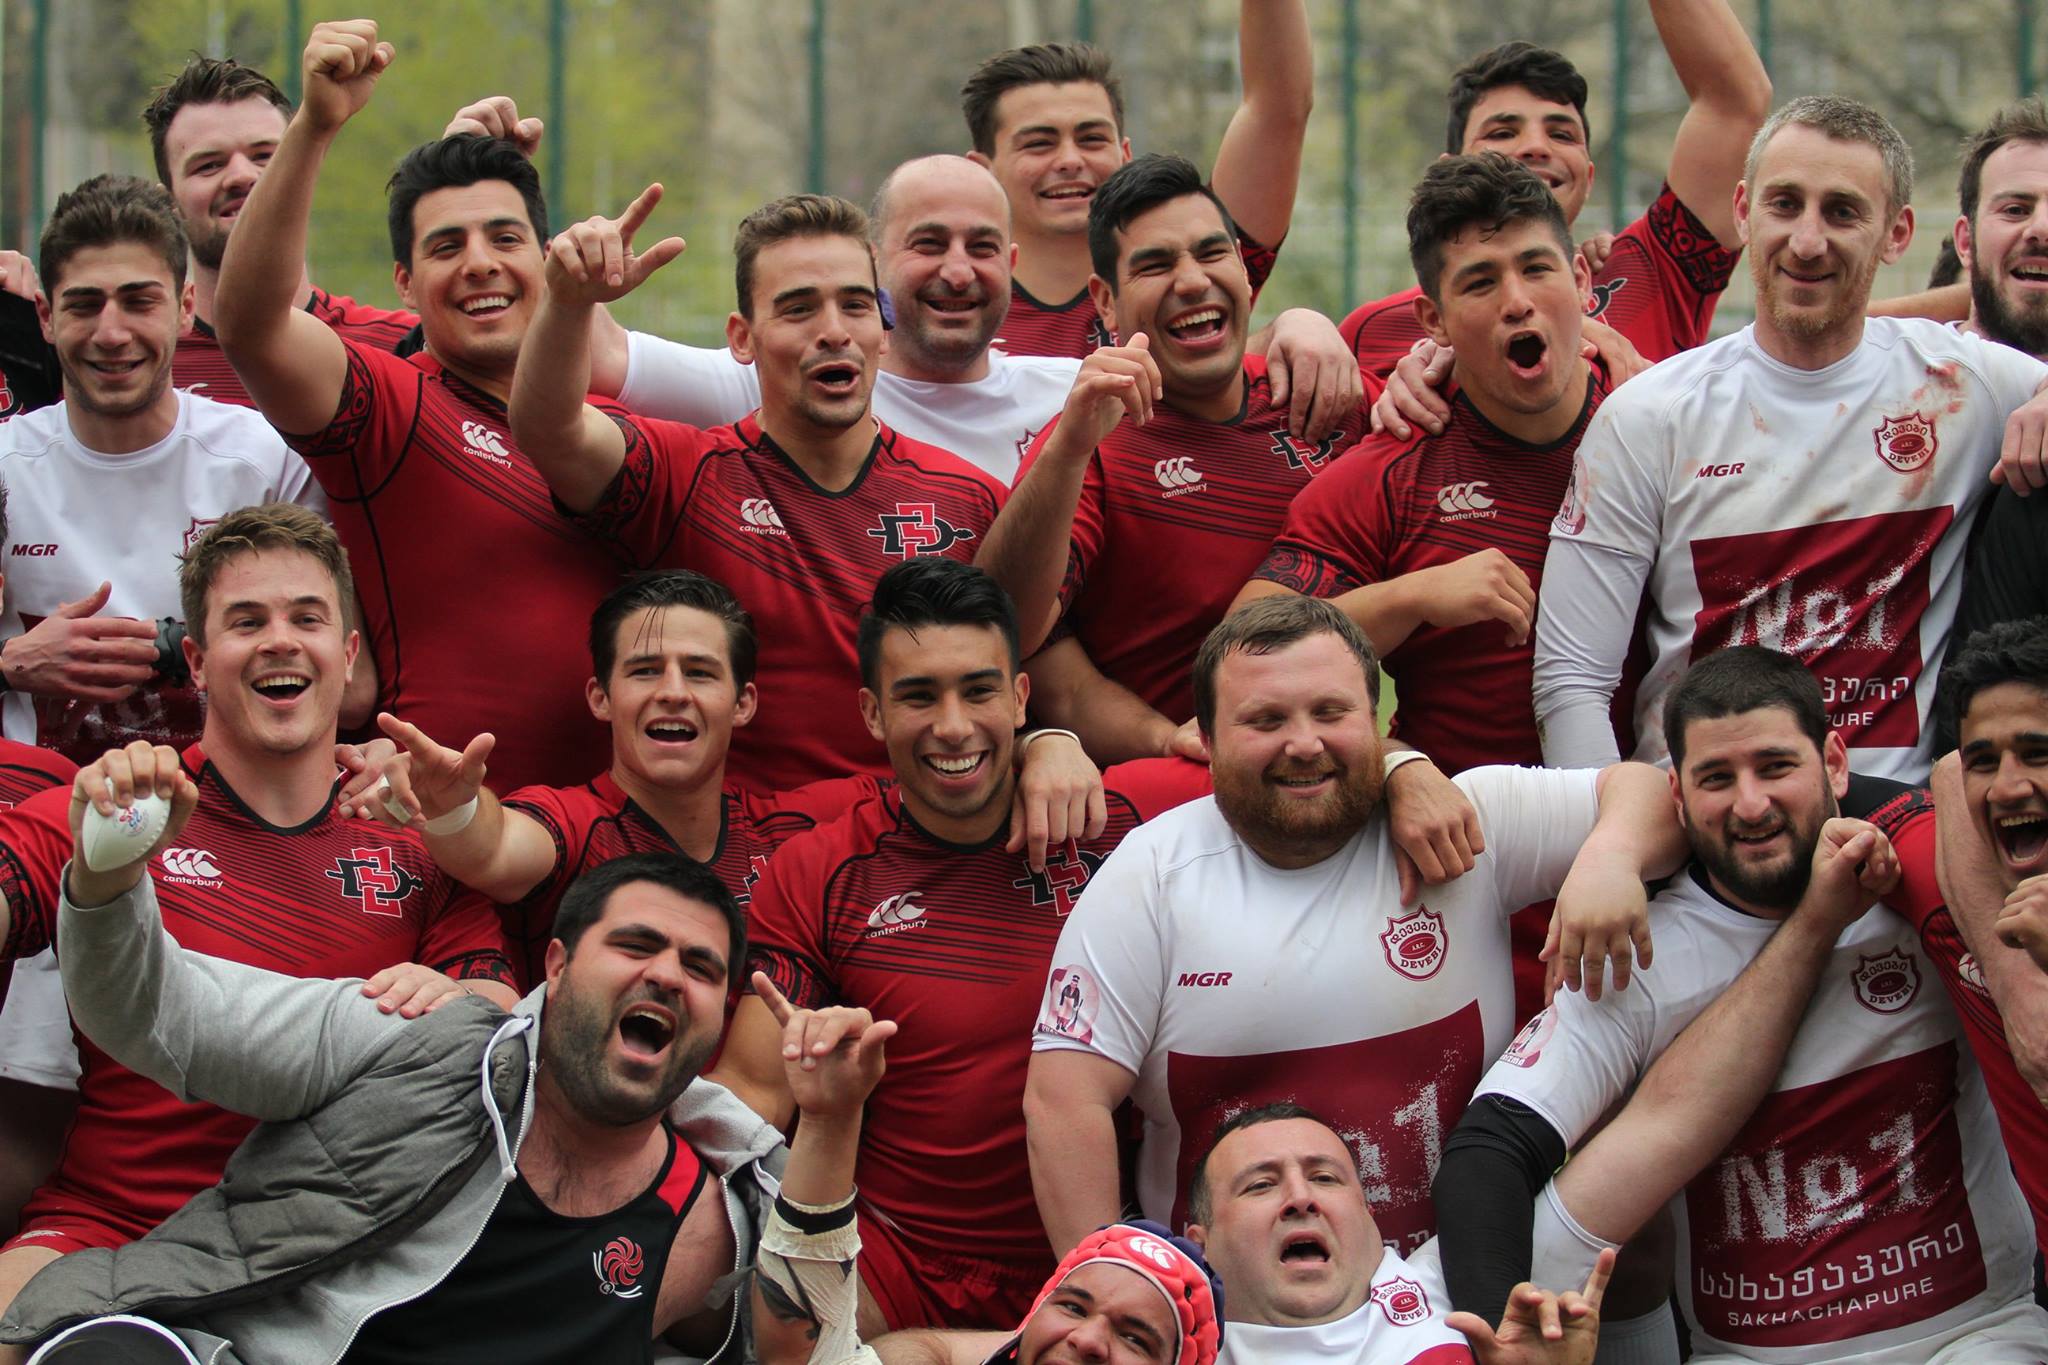 San Diego State University rugby in Tbilisi March-April 2017.